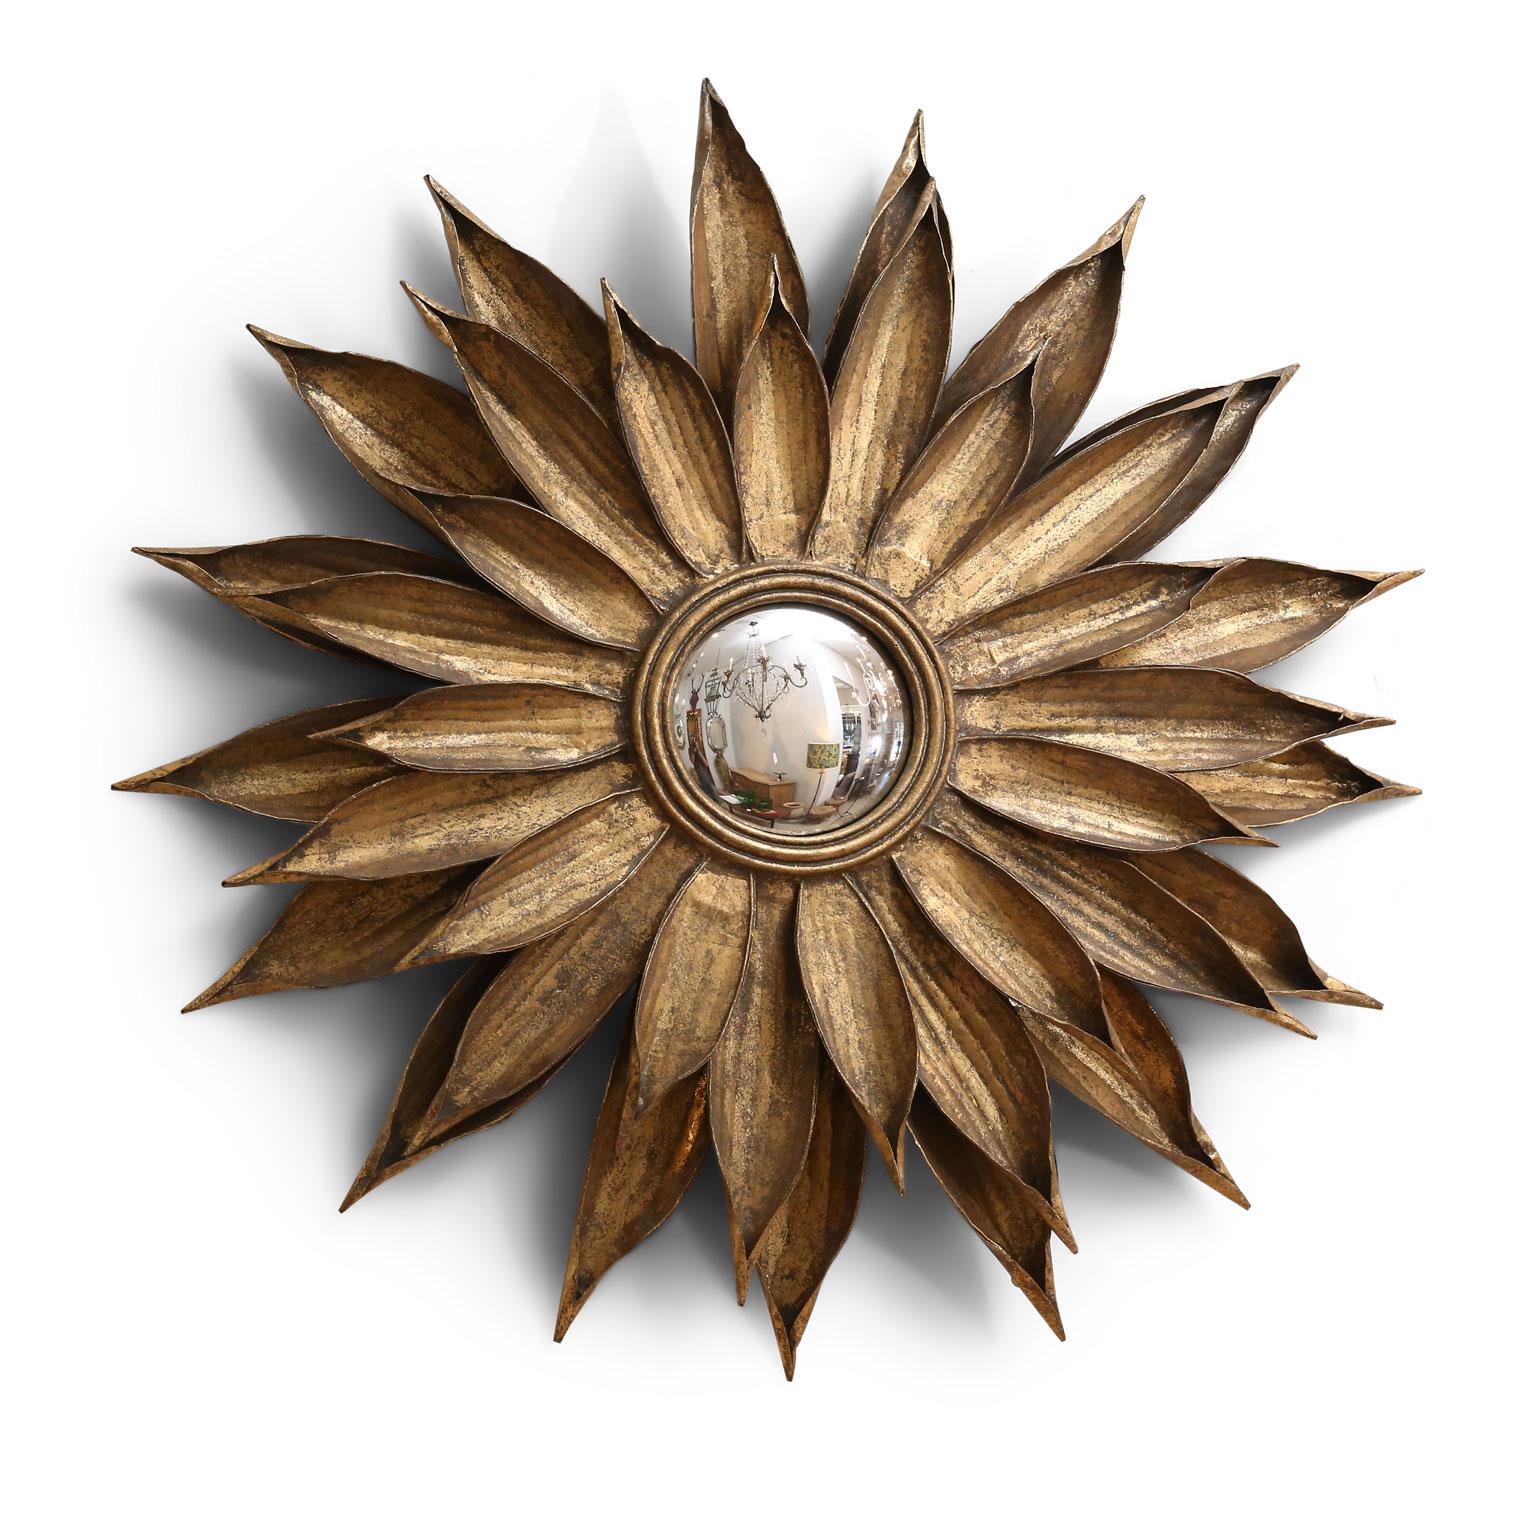 French tole flower-shape mirror, circa 1950-1969. Frame surrounds a convex mirror and is adorned in its original gilded finish.